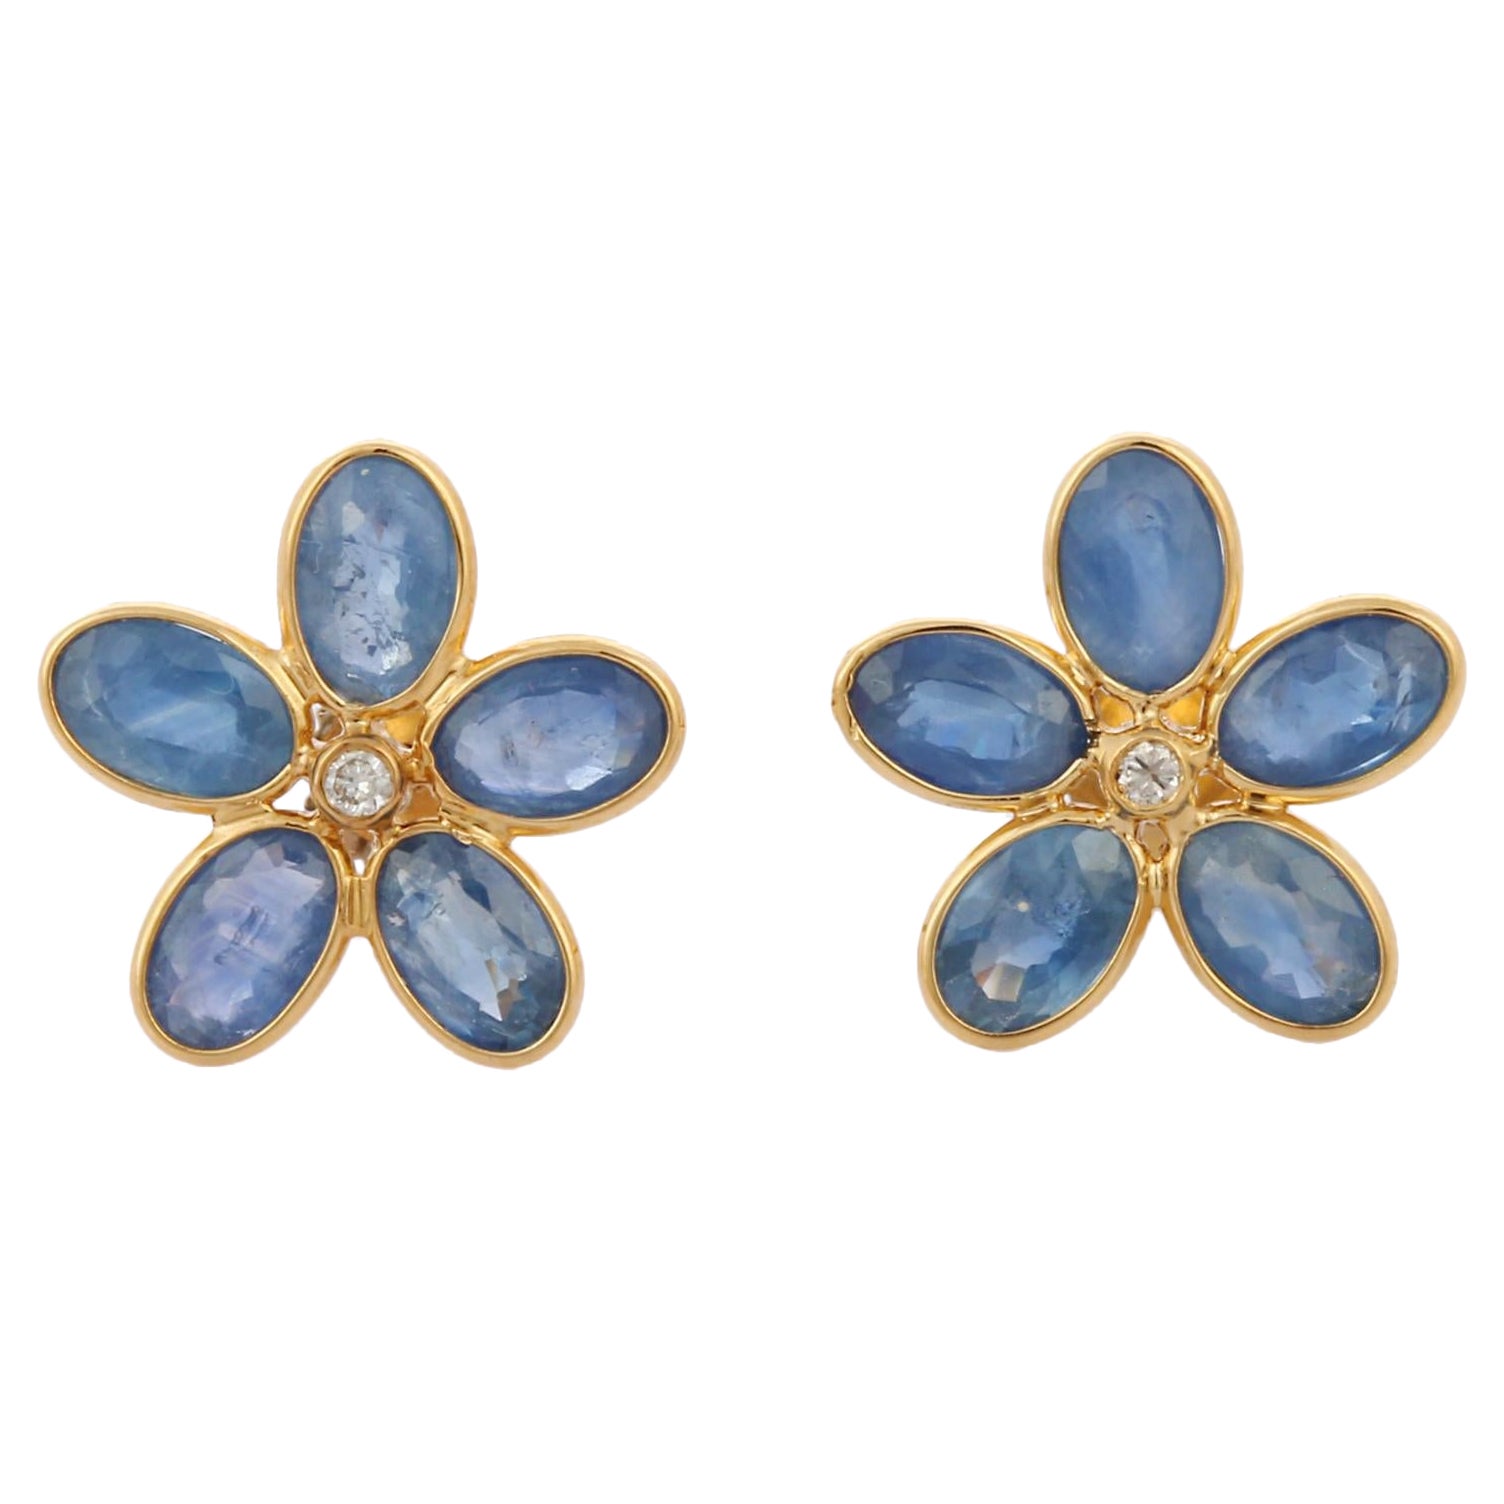 Floral 3.5 ct Blue Sapphire and Diamond Stud Earrings in 18K Yellow Gold